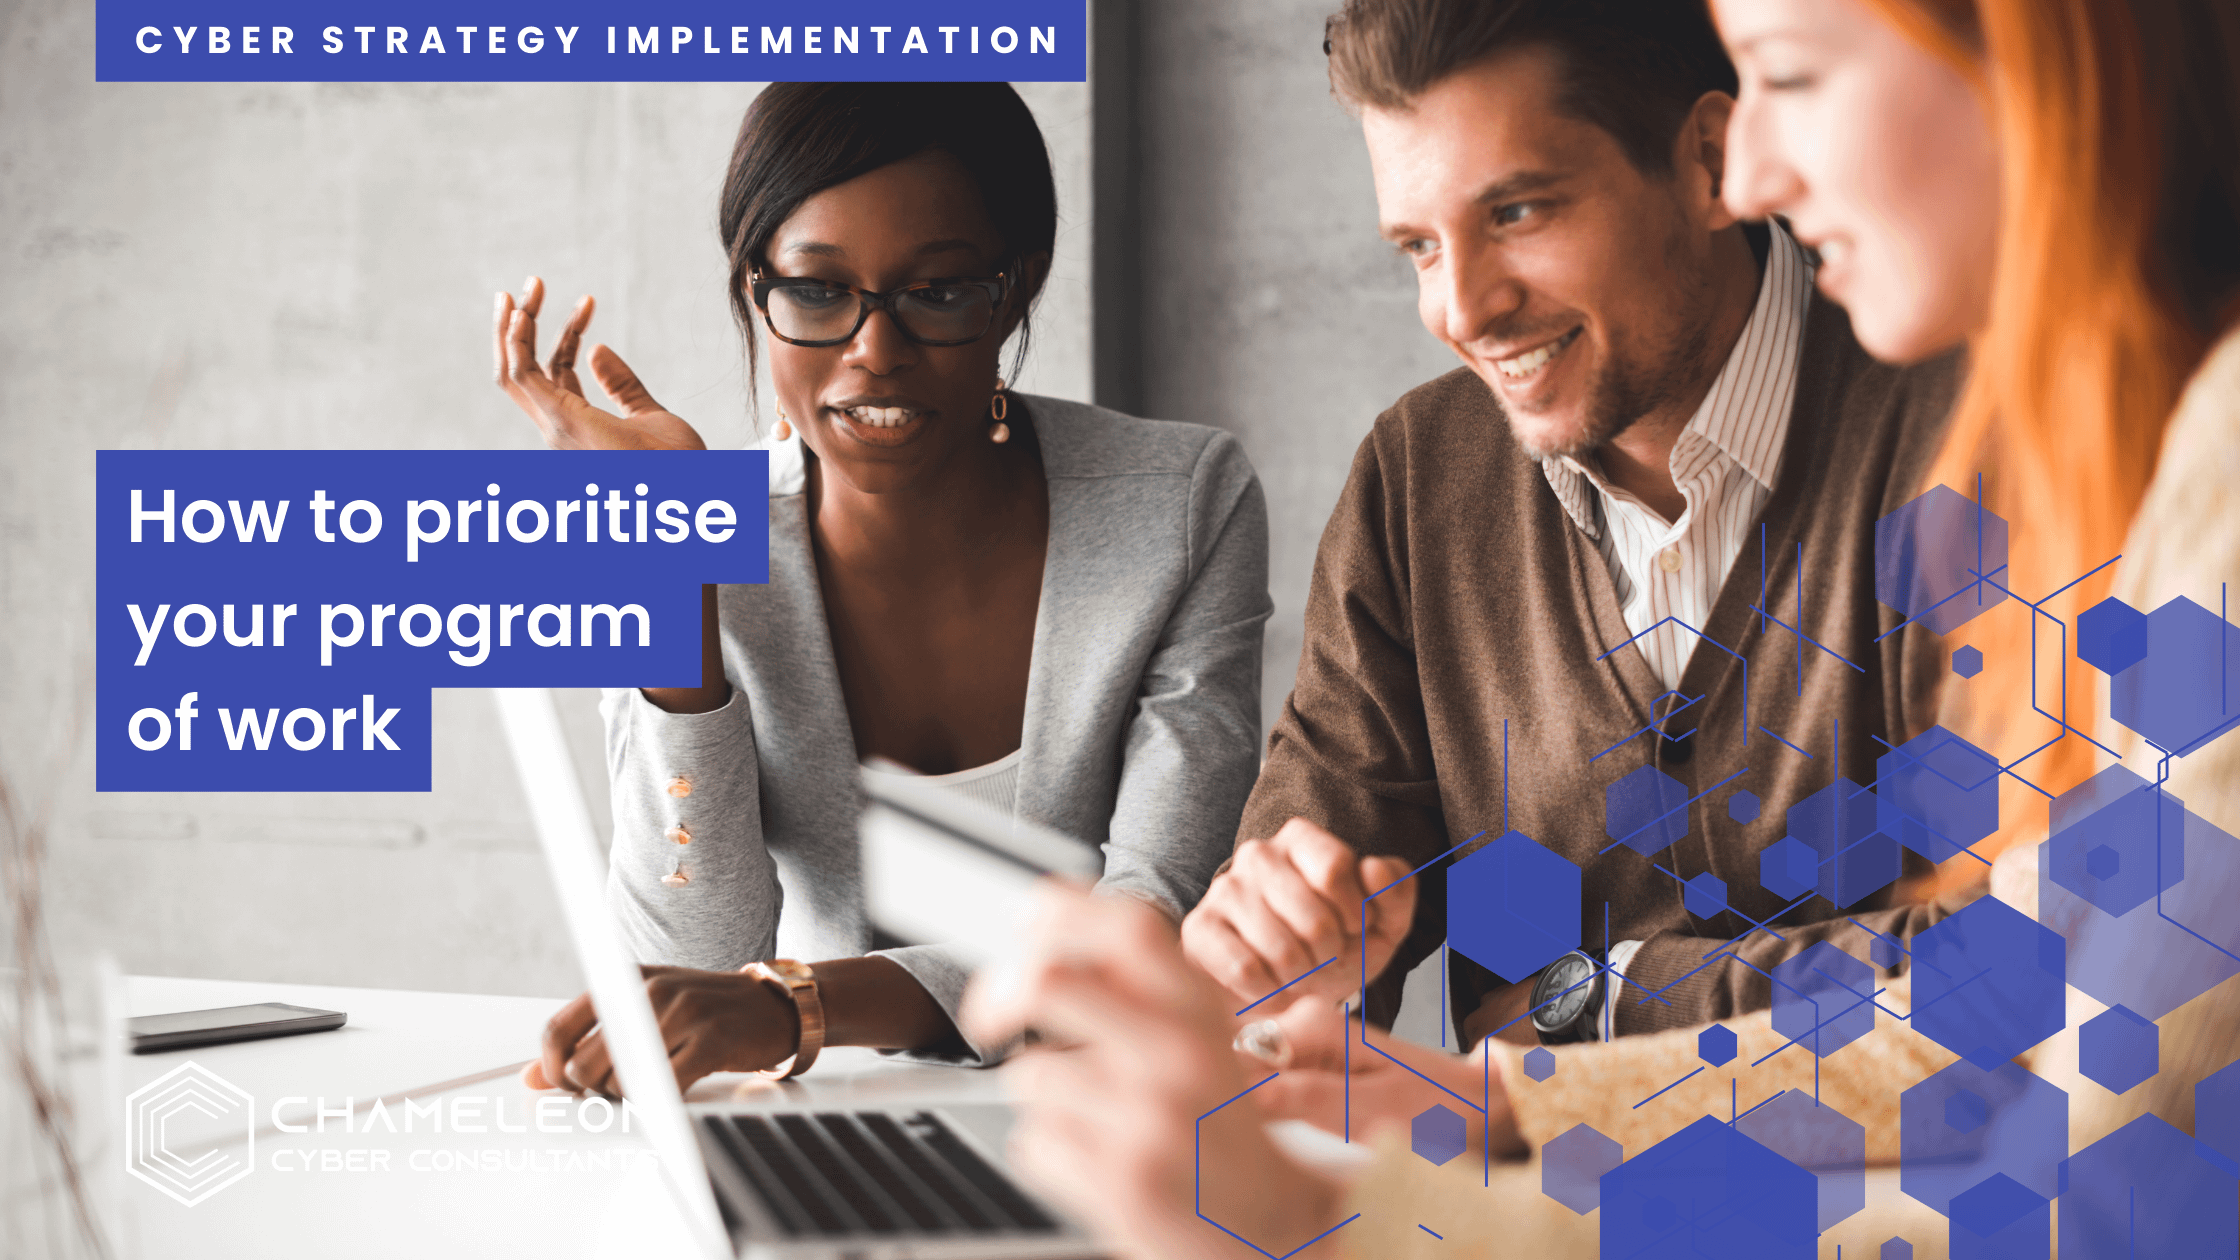 Strategy implementation - How to prioritise your programme of work